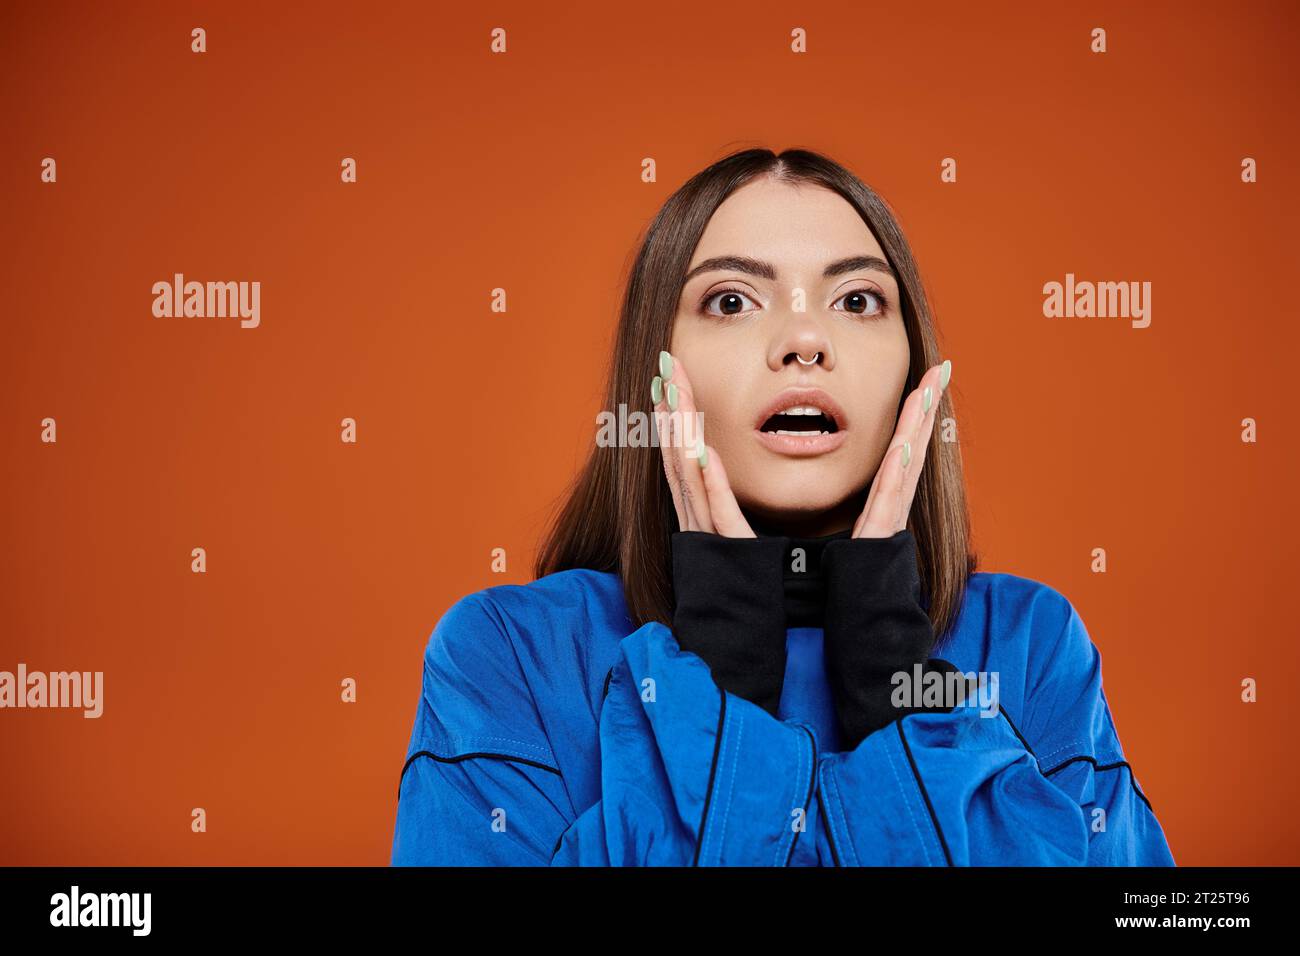 shocked woman with pierced nose touching cheeks with hands and looking at camera on orange backdrop Stock Photo